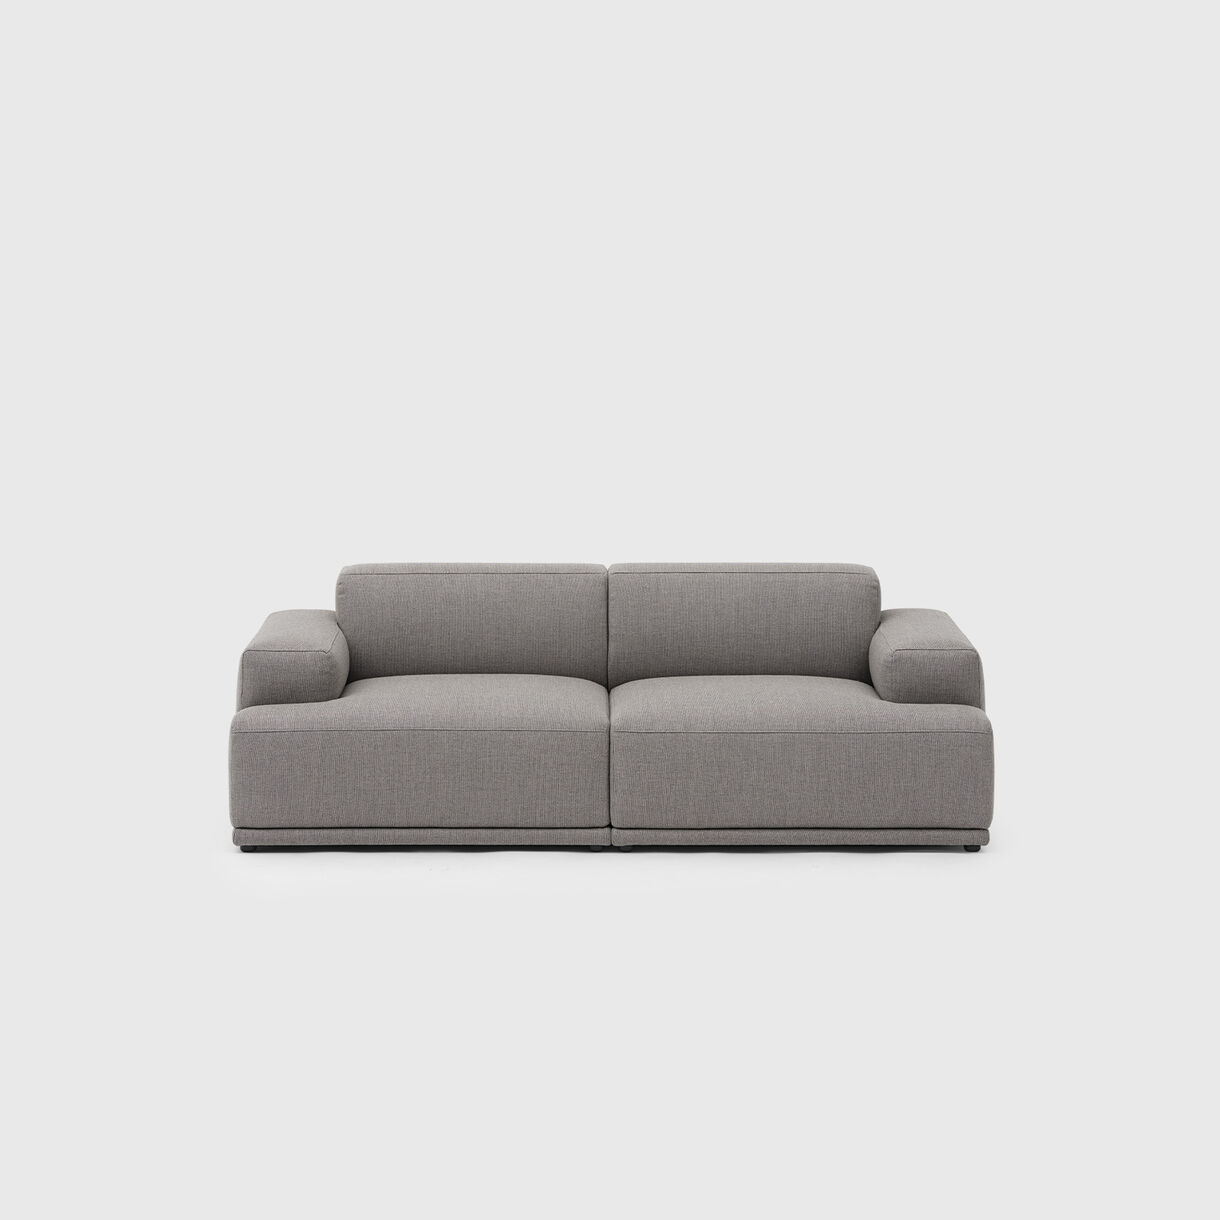 Connect Soft Modular Sofa, 2 Seater, Config 1, Rewool 128